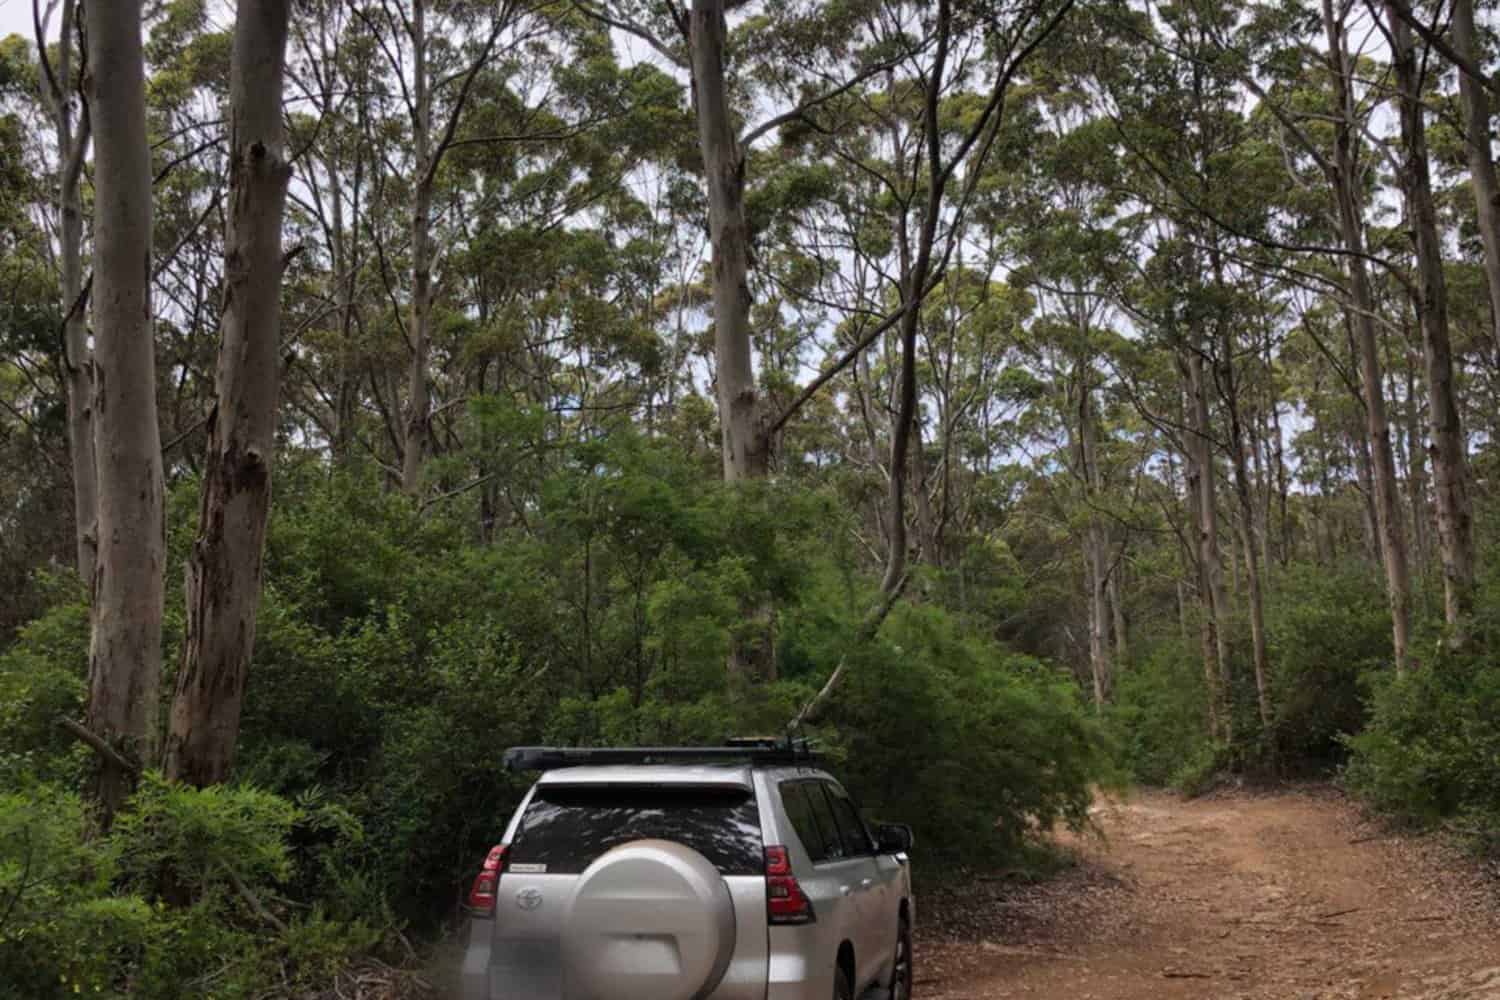 A silver SUV with a spare tire mounted on the back is parked on a rugged dirt road amidst the tall, slender trees of Boranup Forest near Margaret River, capturing a peaceful moment in a quintessential Australian woodland setting.